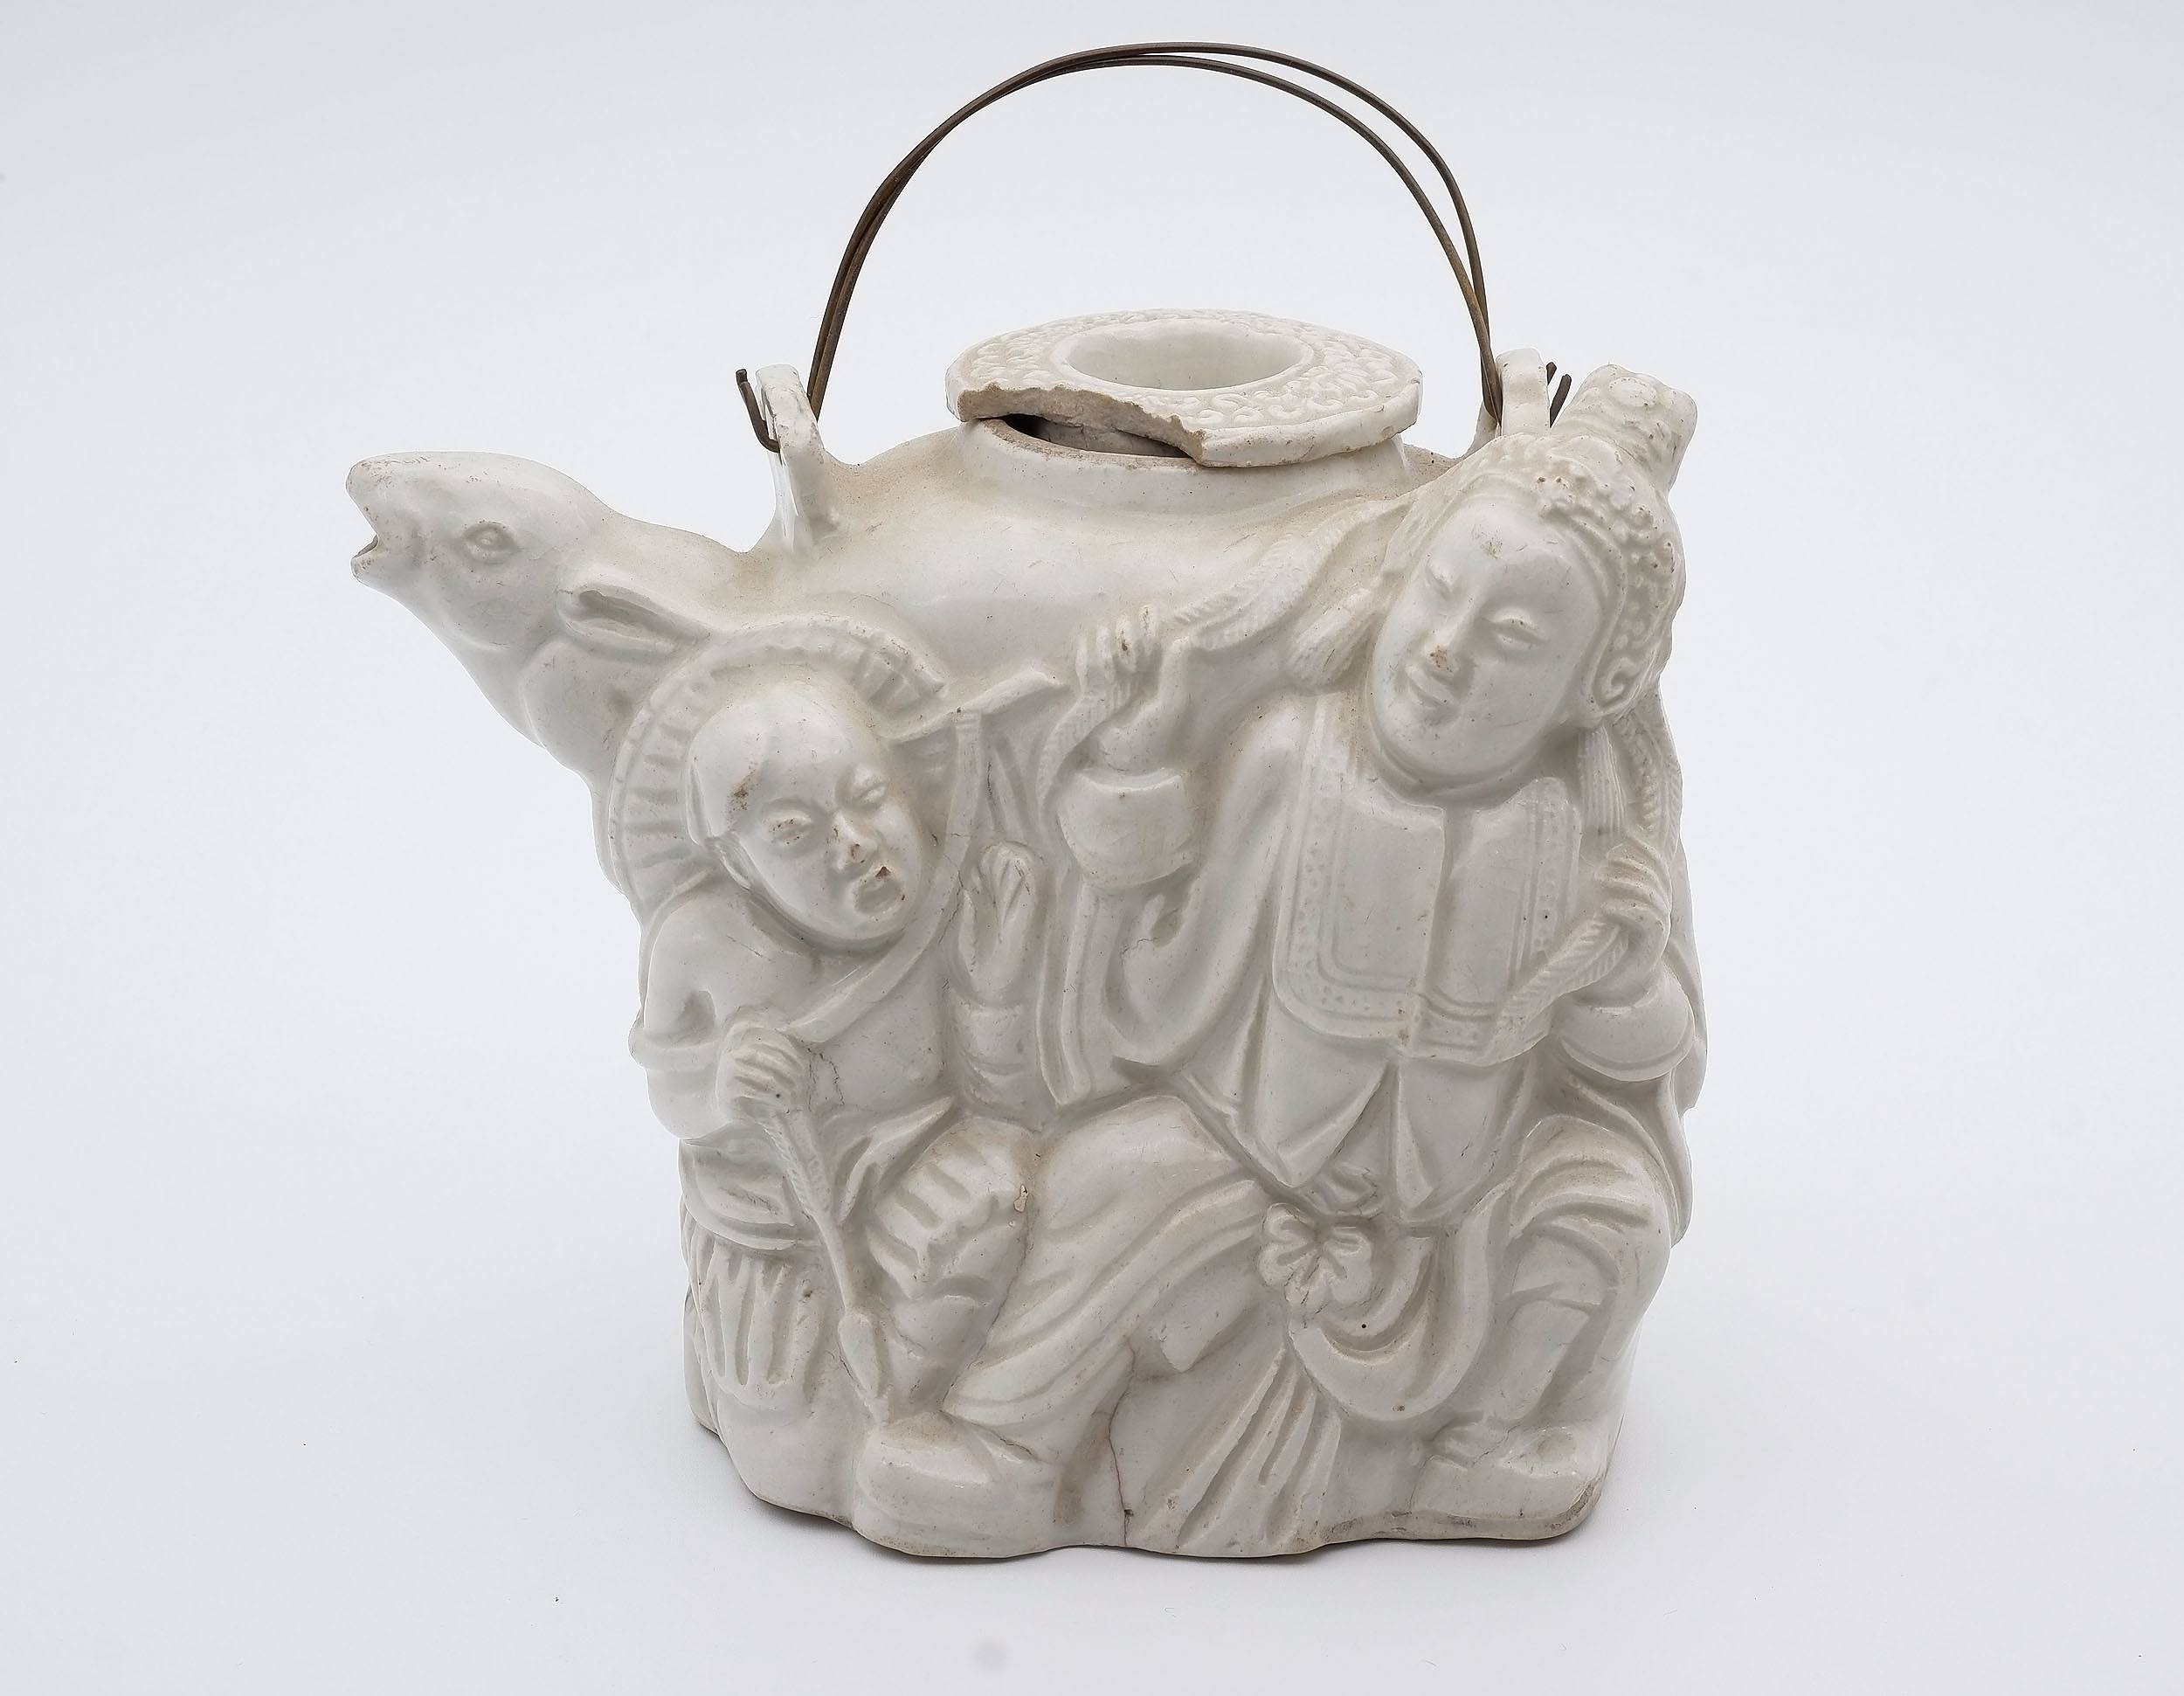 'Chinese Blanc de Chine Figural Teapot, Qing Dynasty'